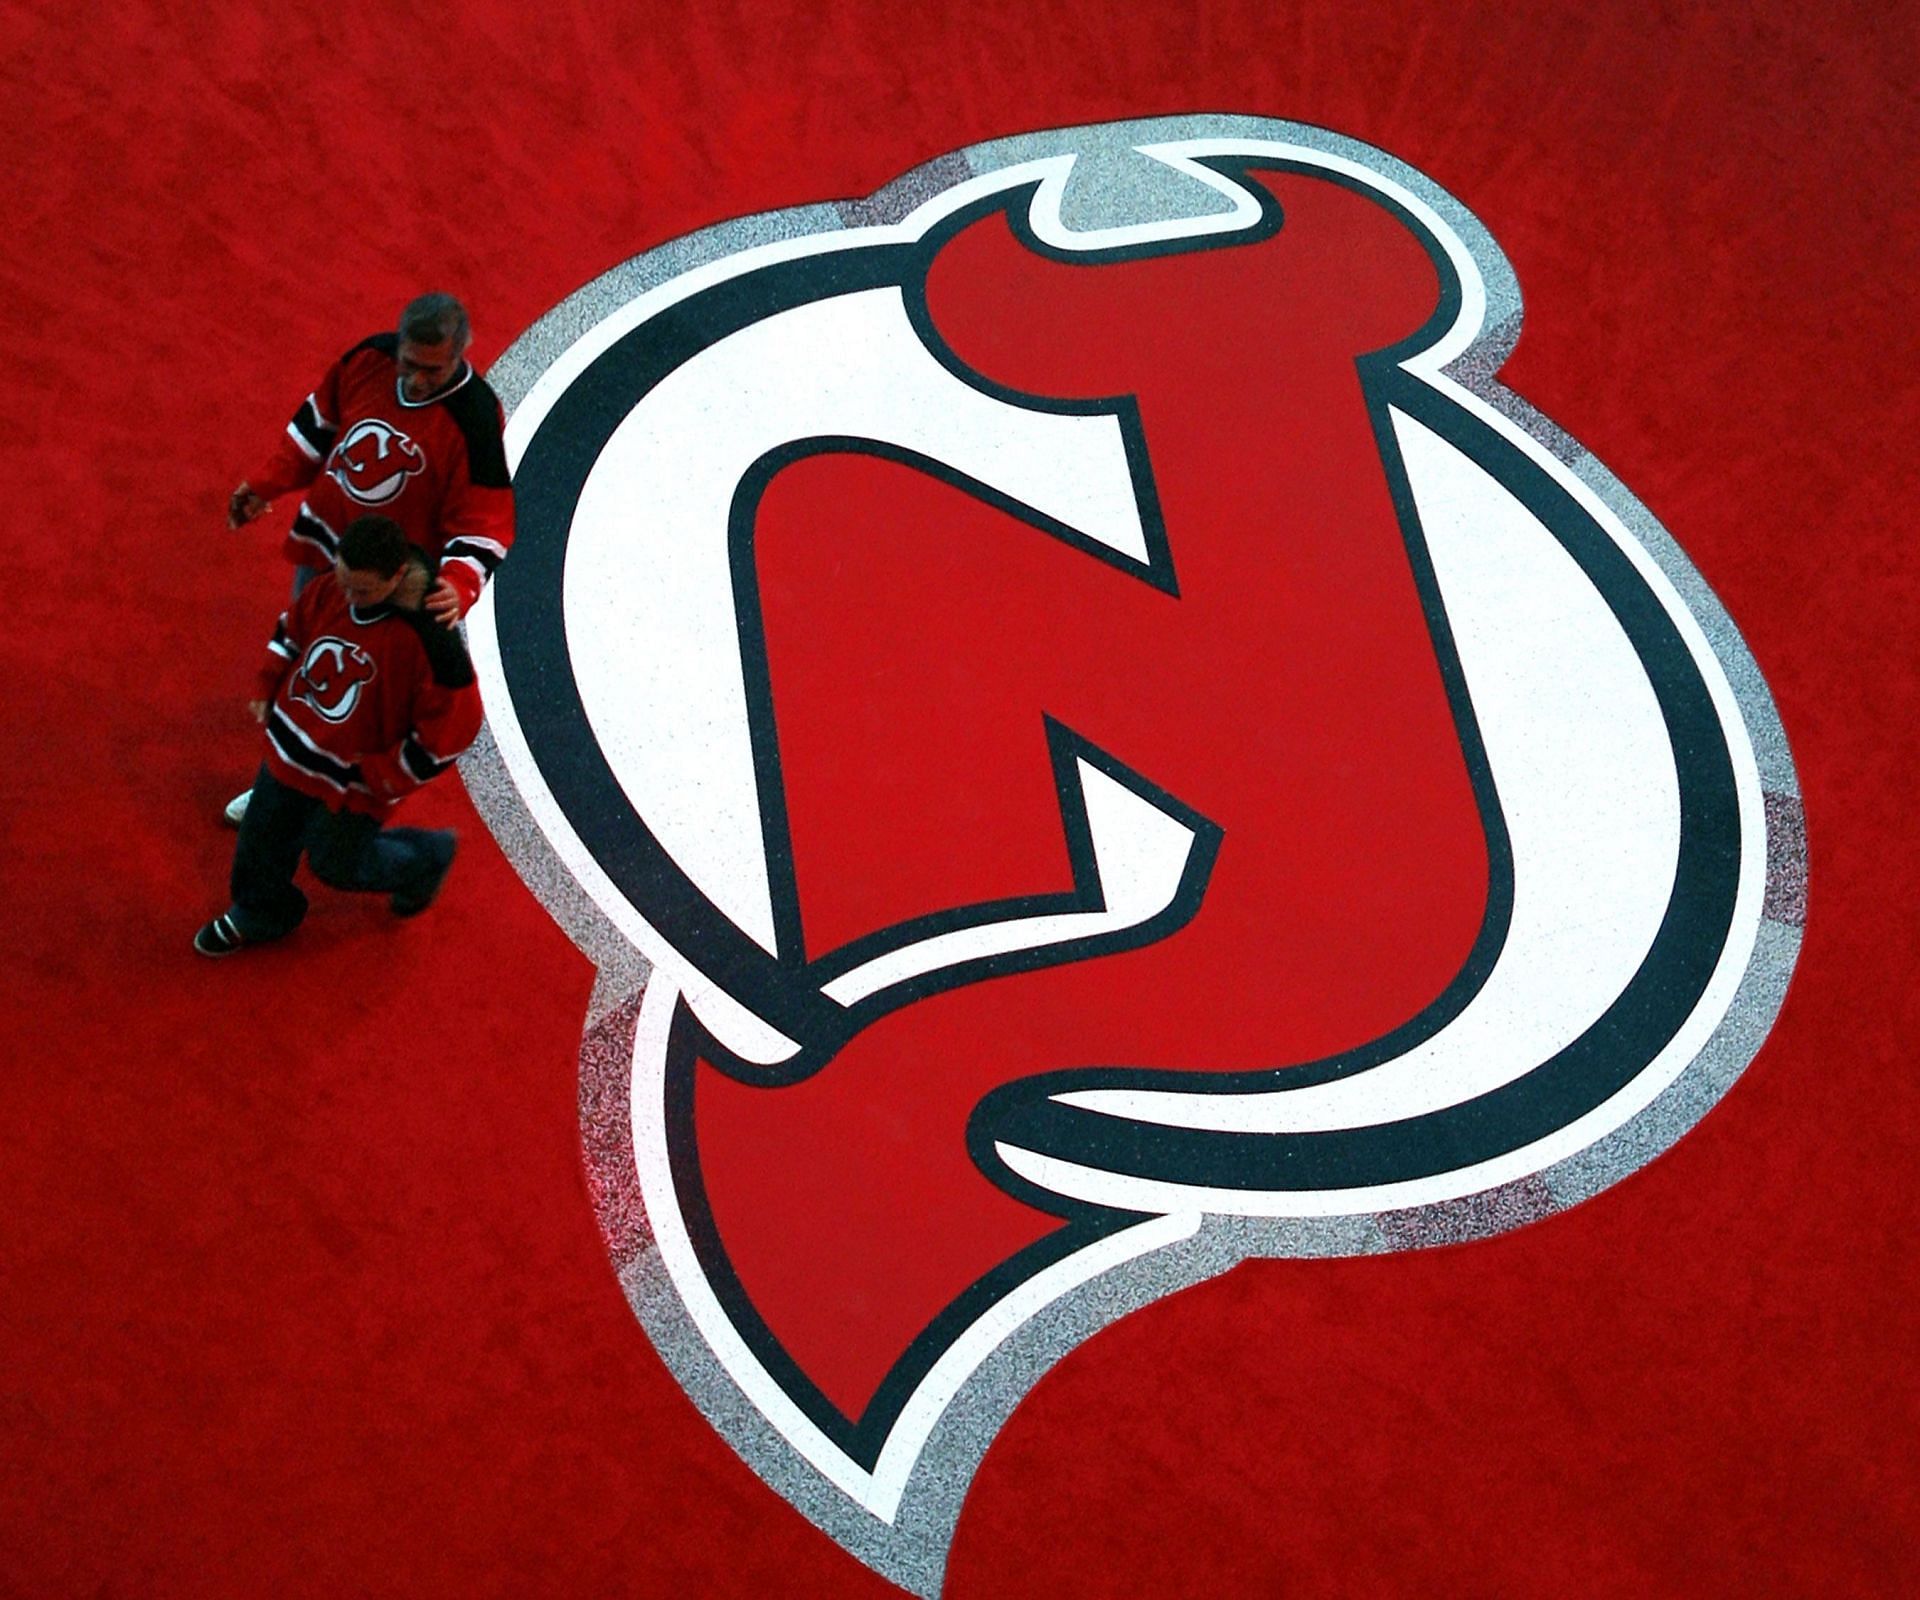 Devils vs. Hurricanes: Schedule, ticket info and more to know for the series